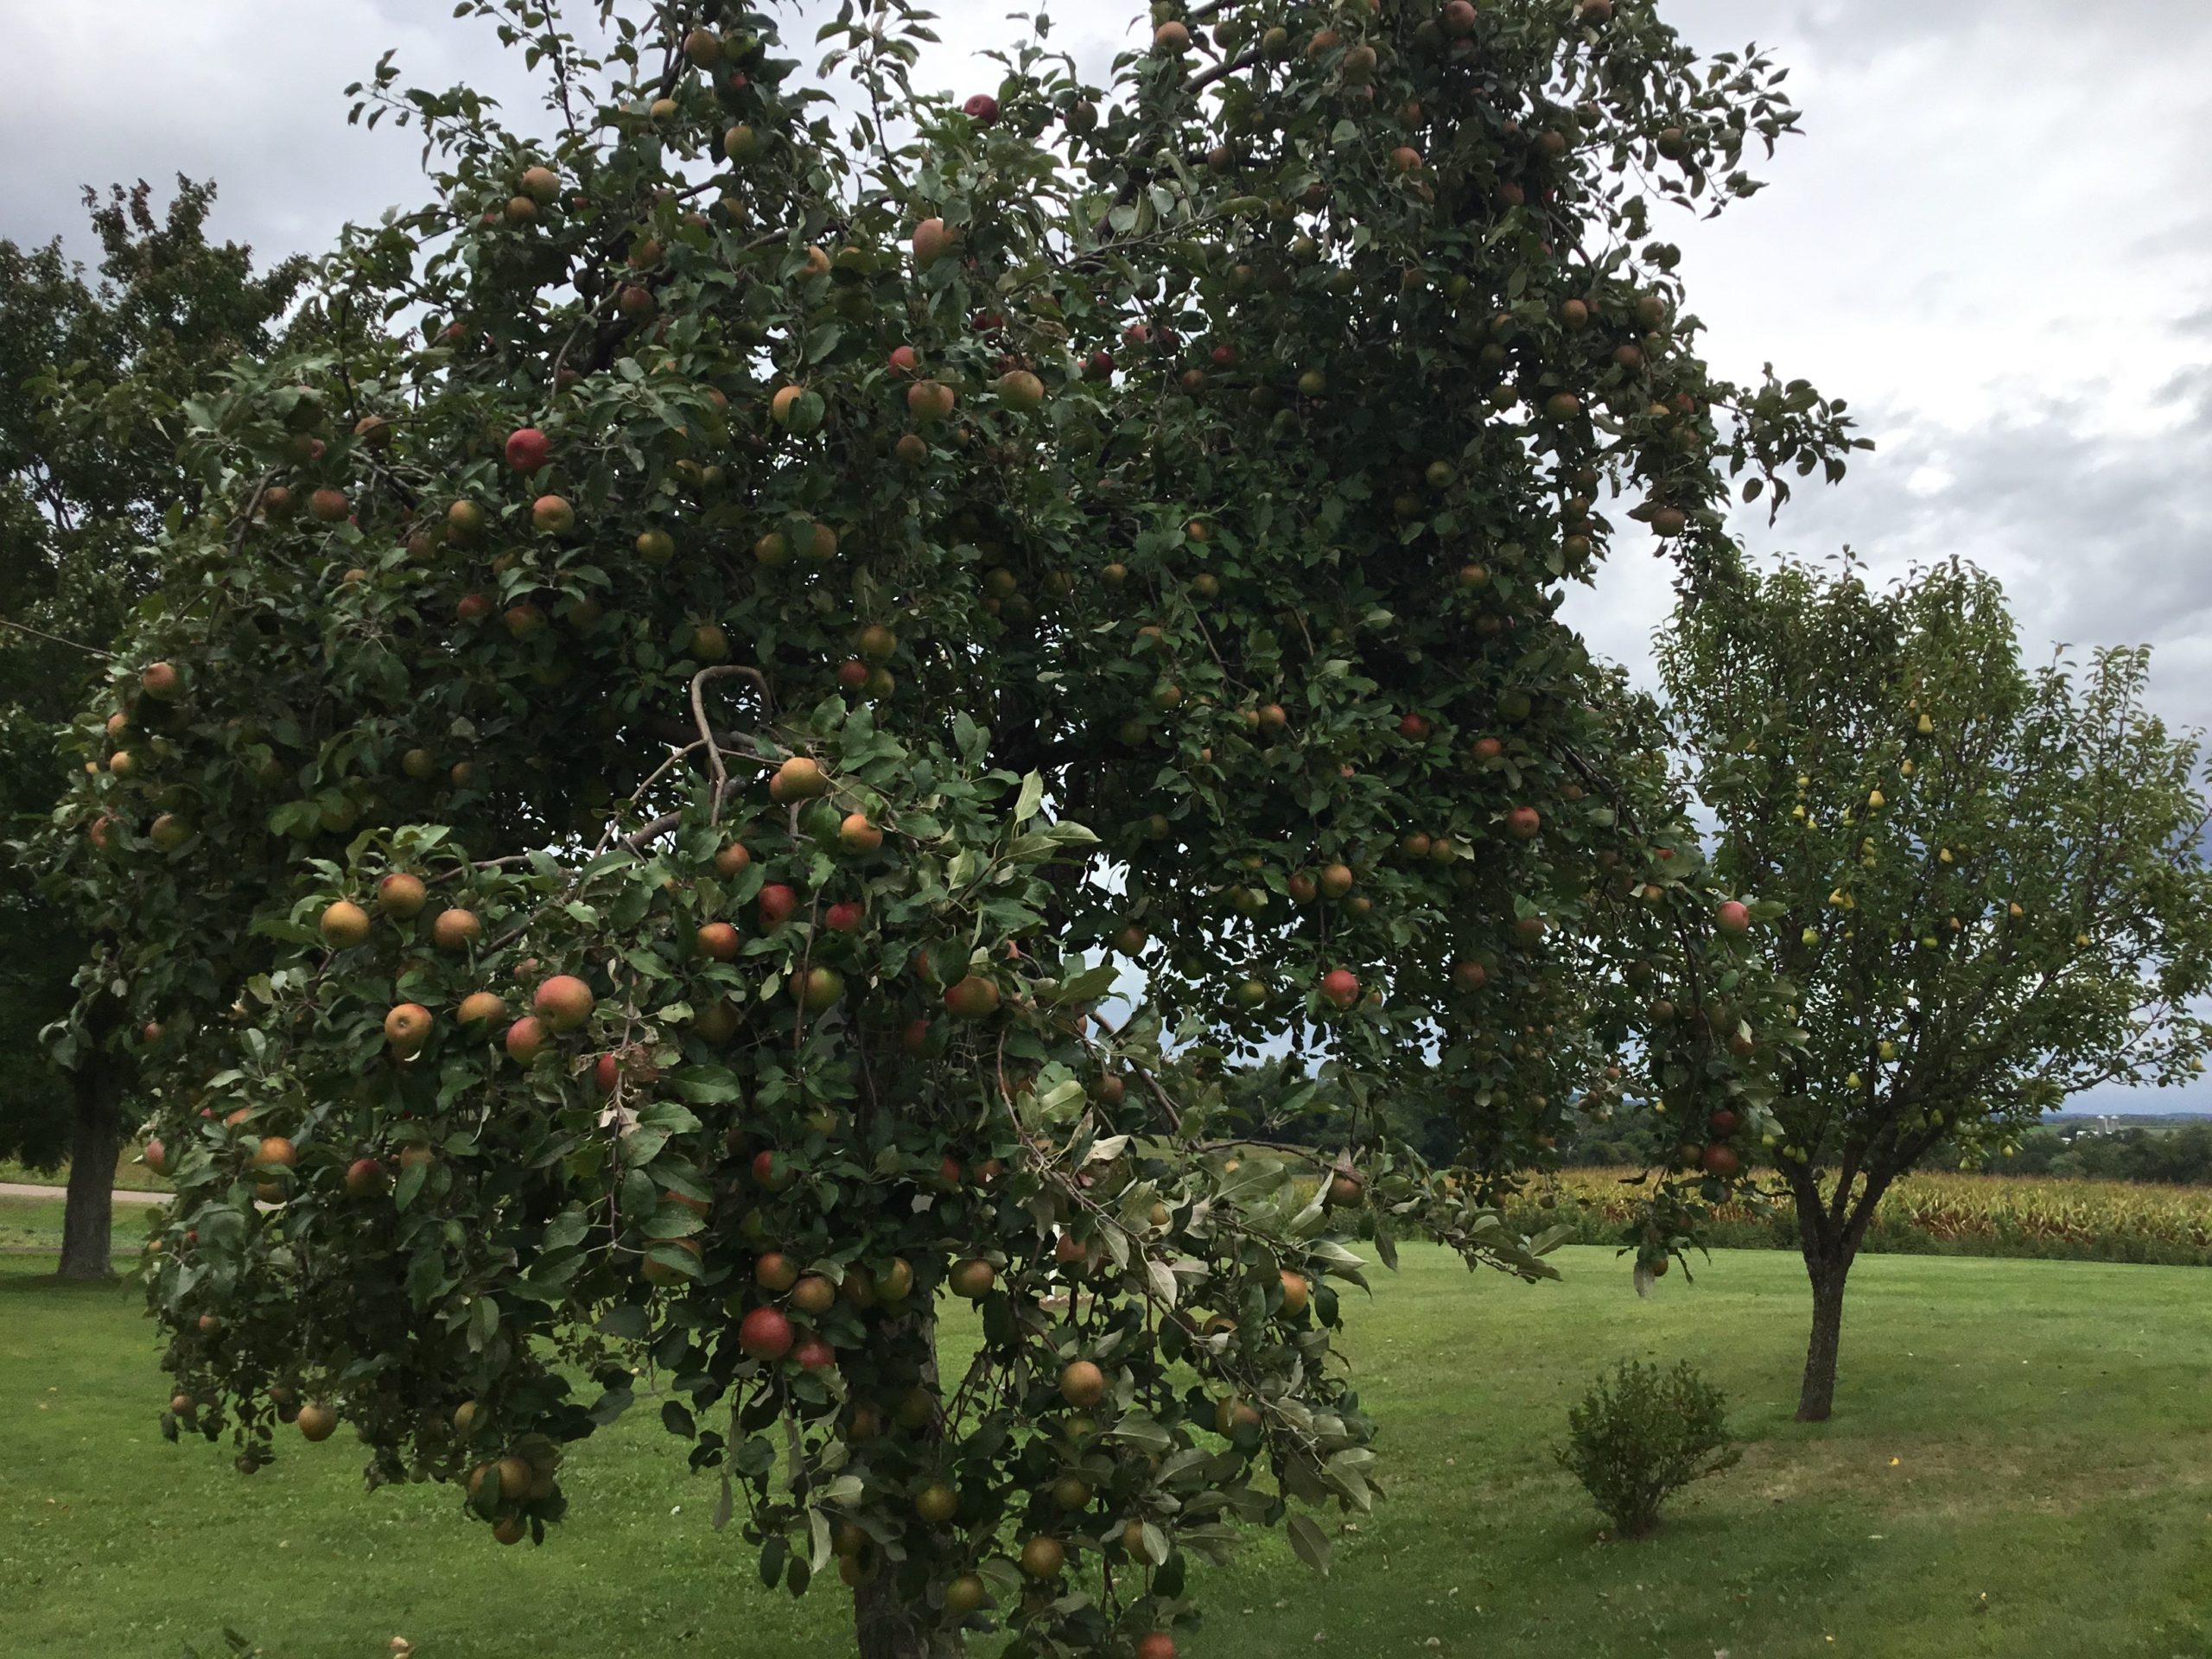 Five tips to keep fruit trees healthy and yielding a bountiful harvest